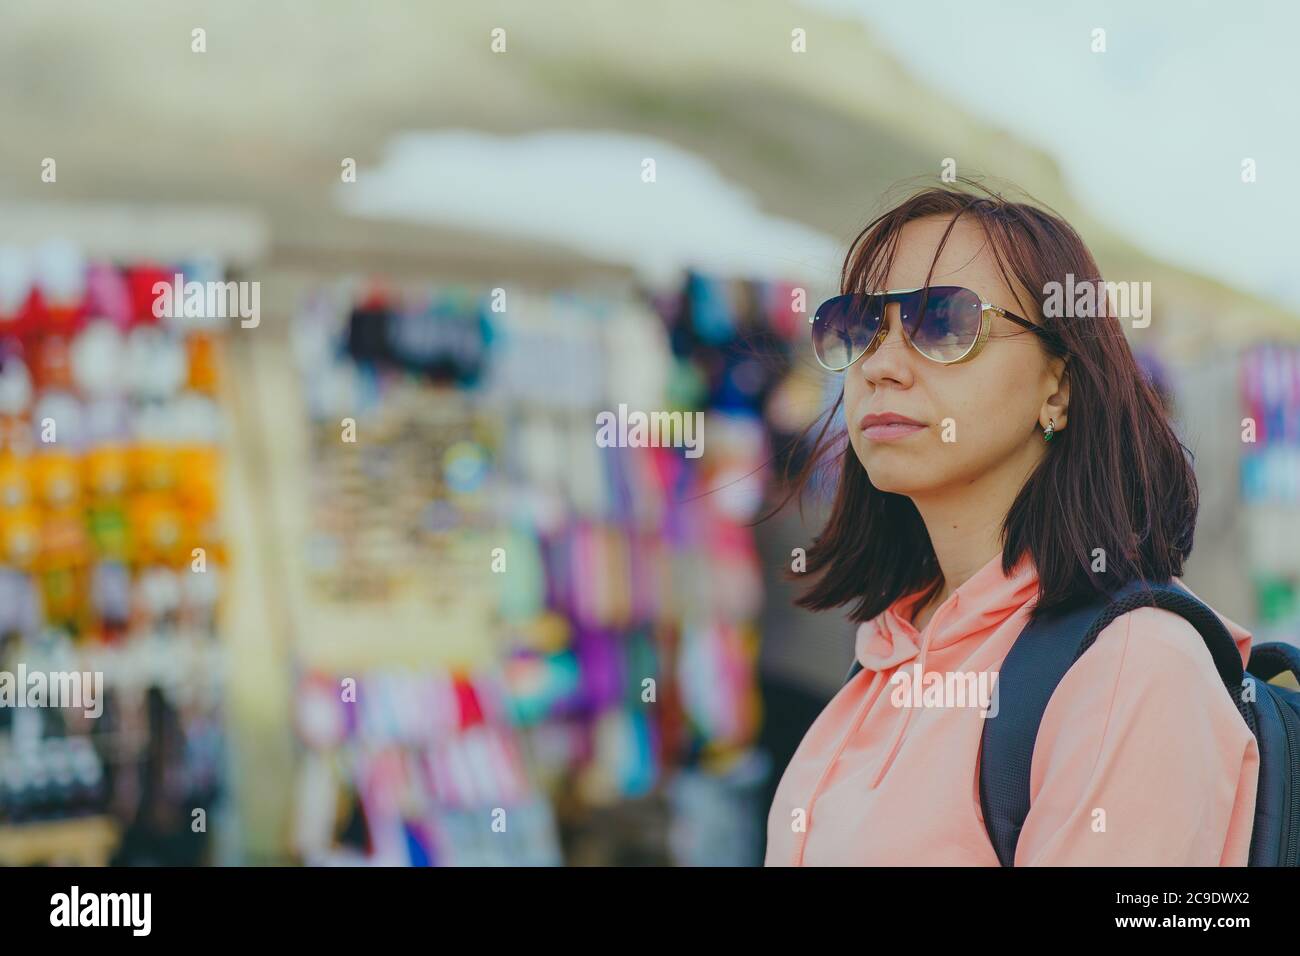 Female traveler on market in mountainous terrain. Woman tourist considering souvenirs in shopping booths. Stock Photo